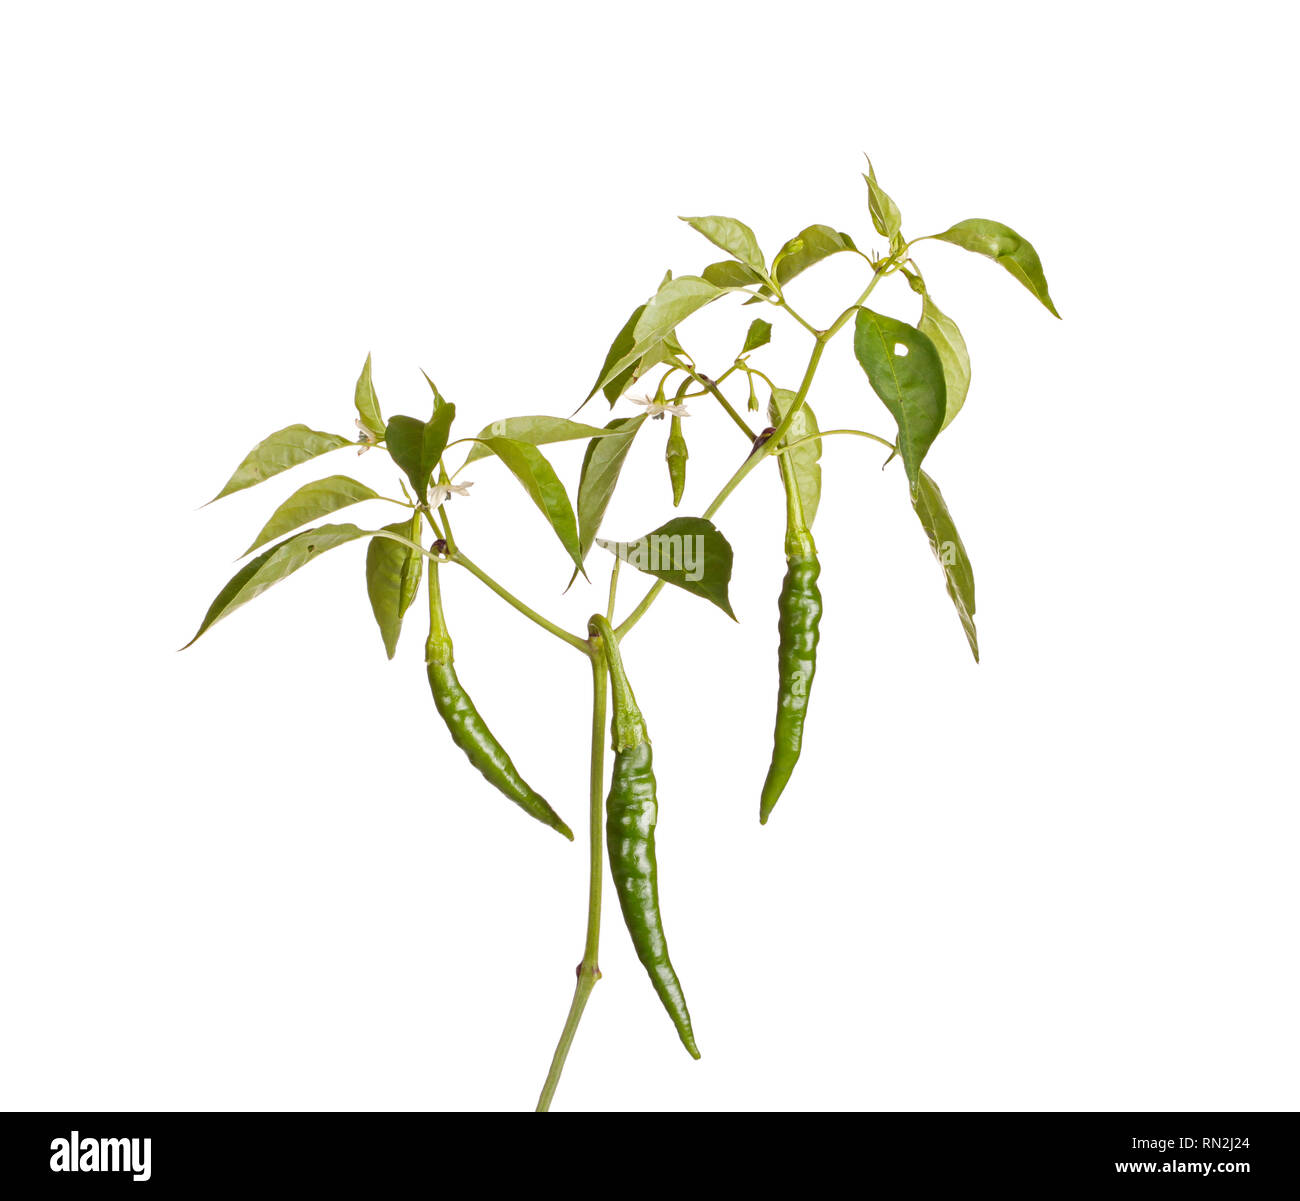 Stem with leaves, flowers and several developing green fruits of a hot chili pepper plant (Capsicum annuum) isolated against a white background Stock Photo